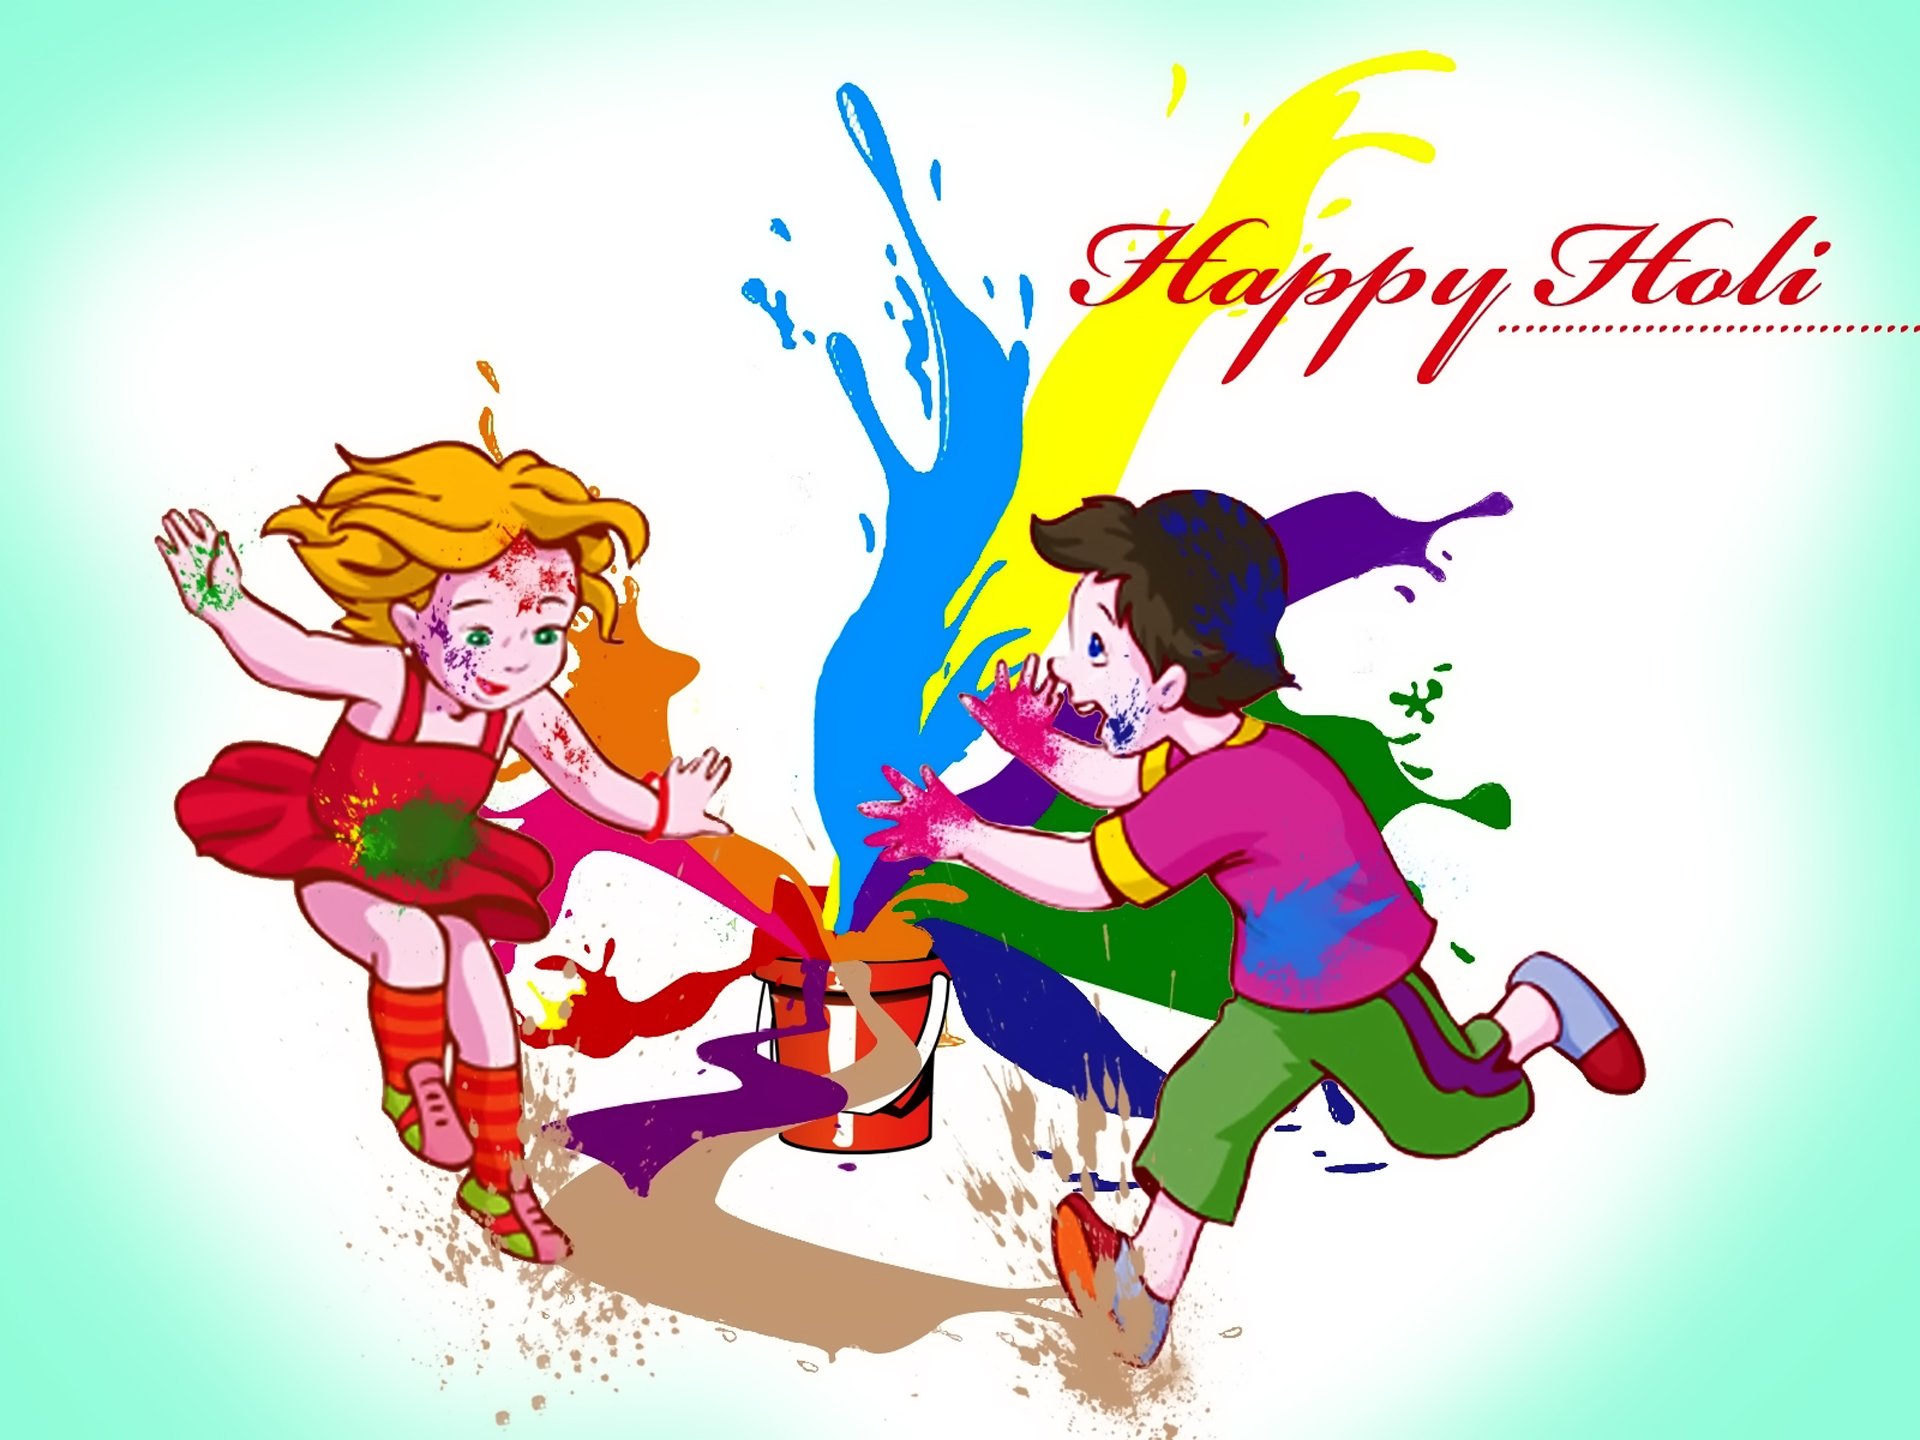 Happy Holi Hd Wallpapers - Profile Pic Of Holi, wallpaper, background pictu...